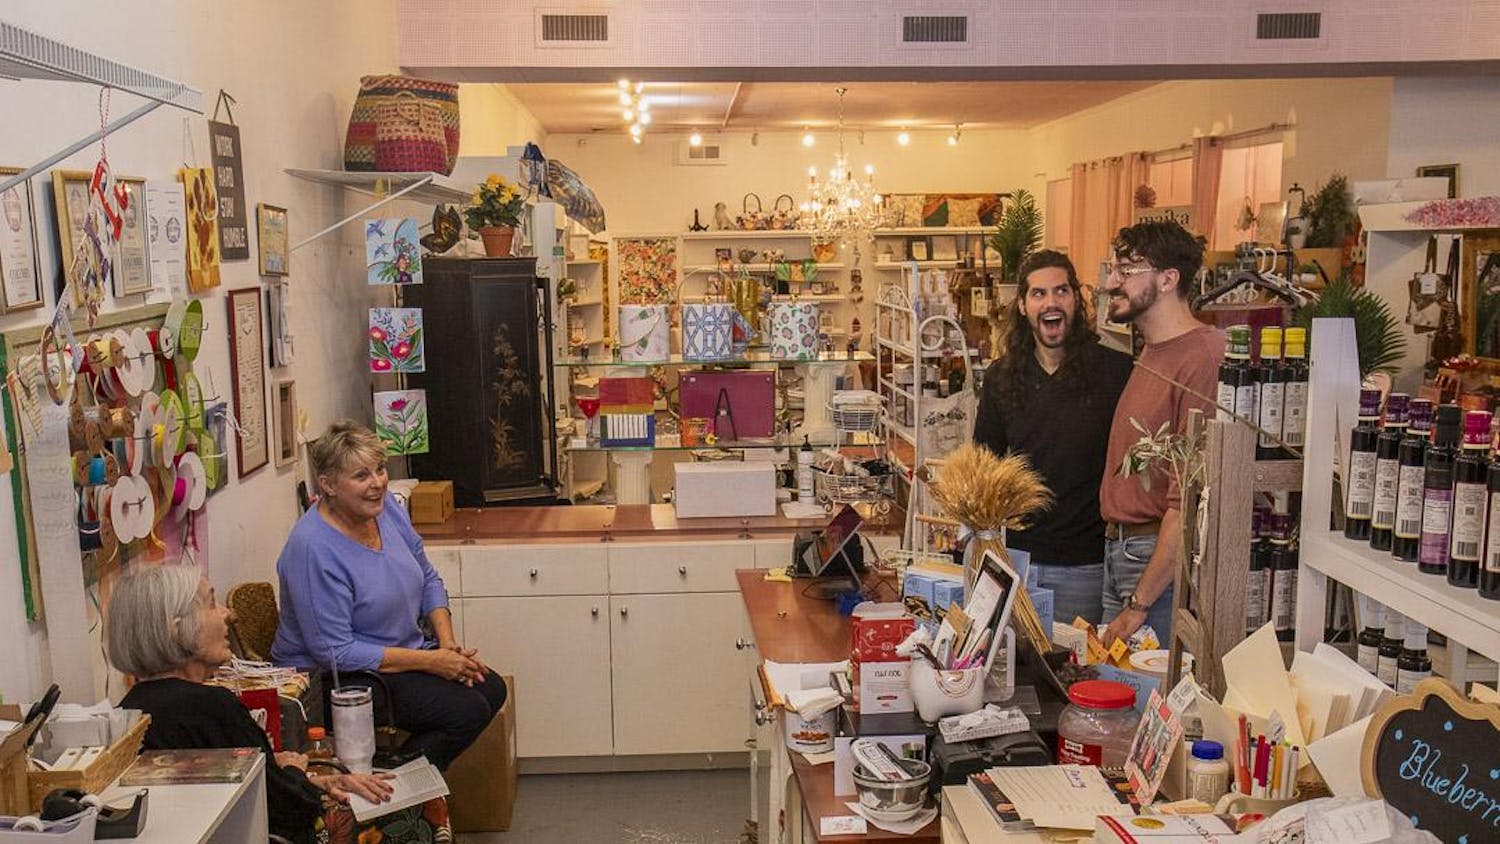 Gibson’s Gifts employees Mary Hanh (left) and Geneva Mobley (second to left) joke with Micah Peroulis (second to right) and William Miller (right) on Oct. 12, 2023. The store, known for its mix of stationery, crafts and handmade gifts, will rebrand to La Boheme in early 2024 to appeal to Five Points' younger demographic.